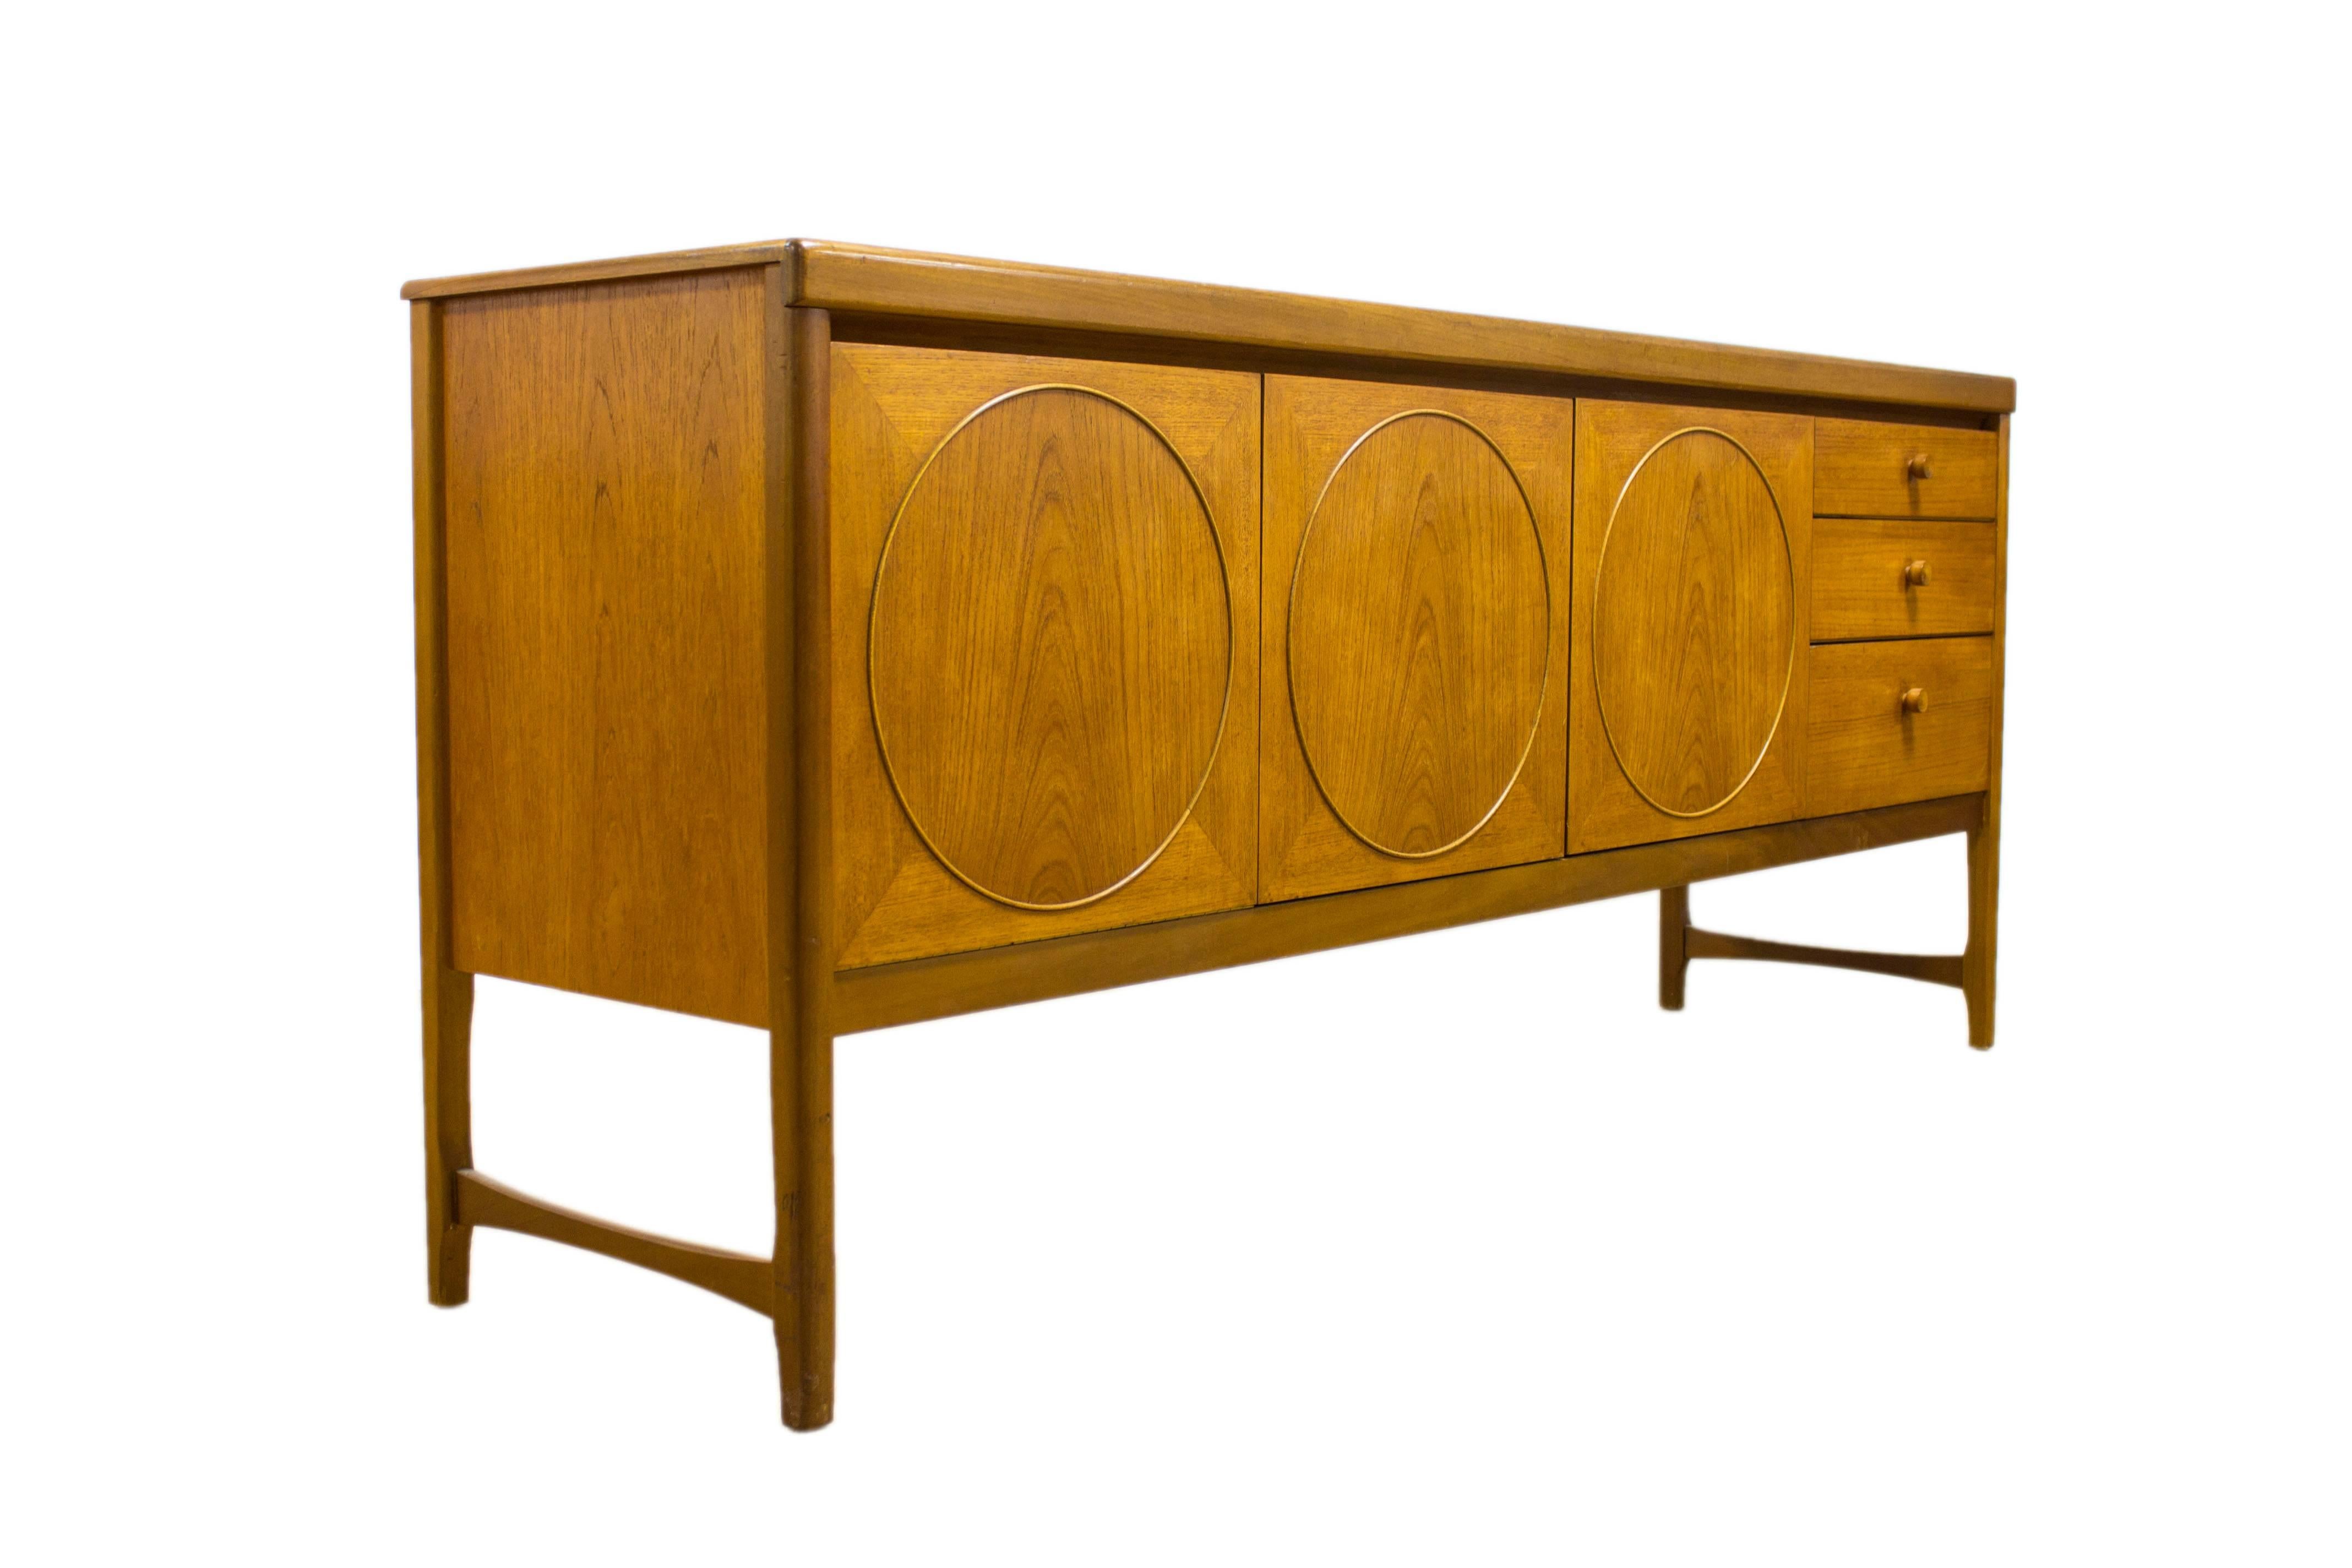 Nathan Circles Teak Mid-Century Sideboard In Excellent Condition For Sale In Greater Manchester, GB